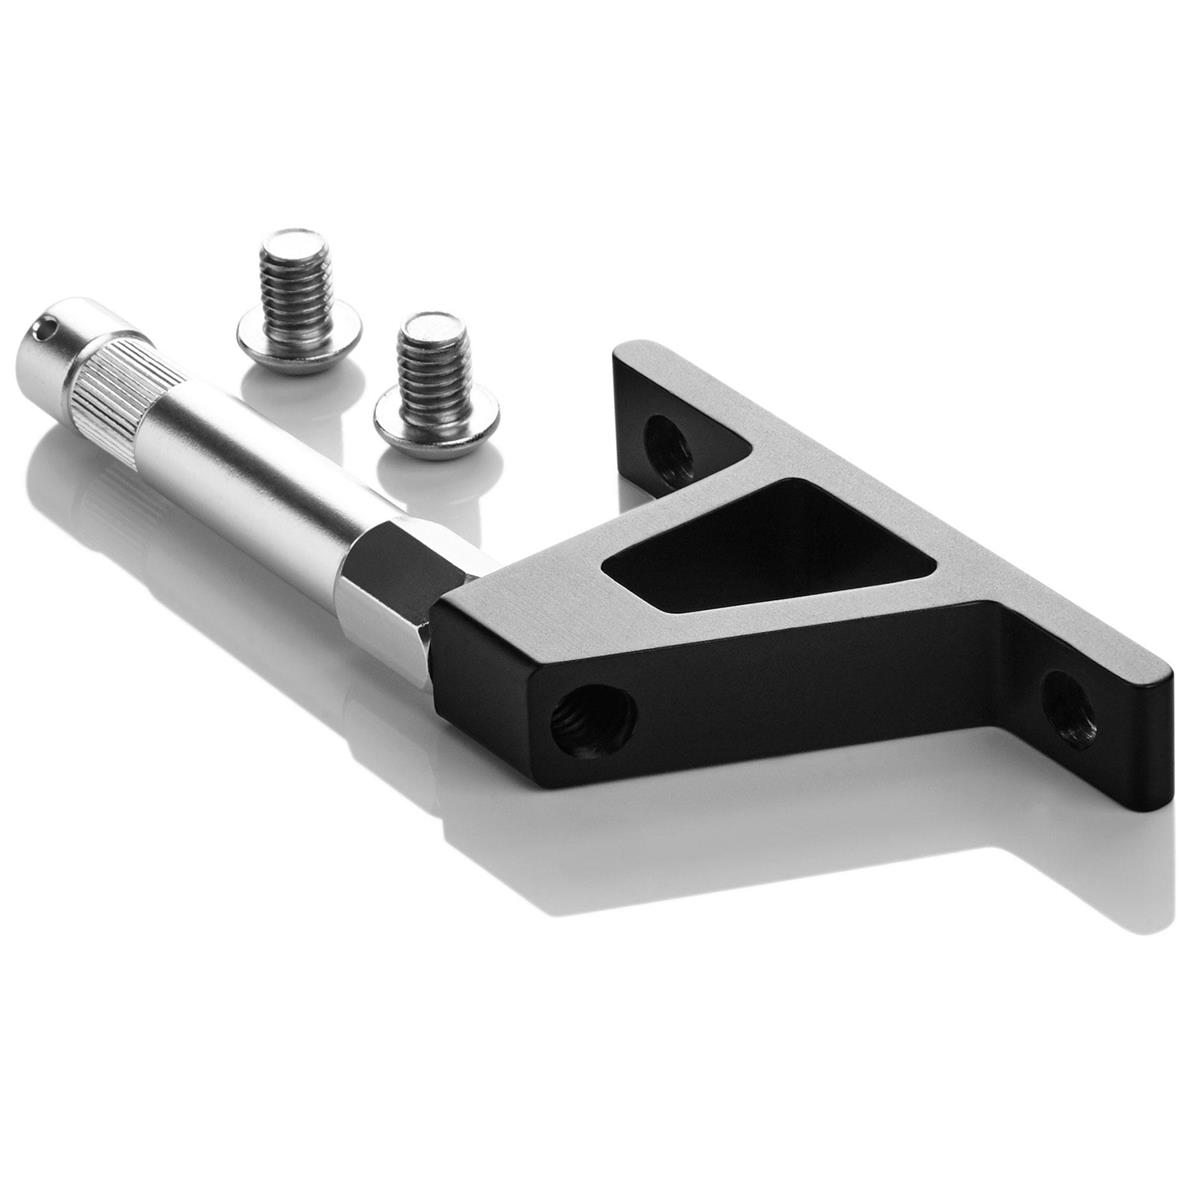 Image of Inovativ Baby Pin Attachment for Insight Monitor Mount System